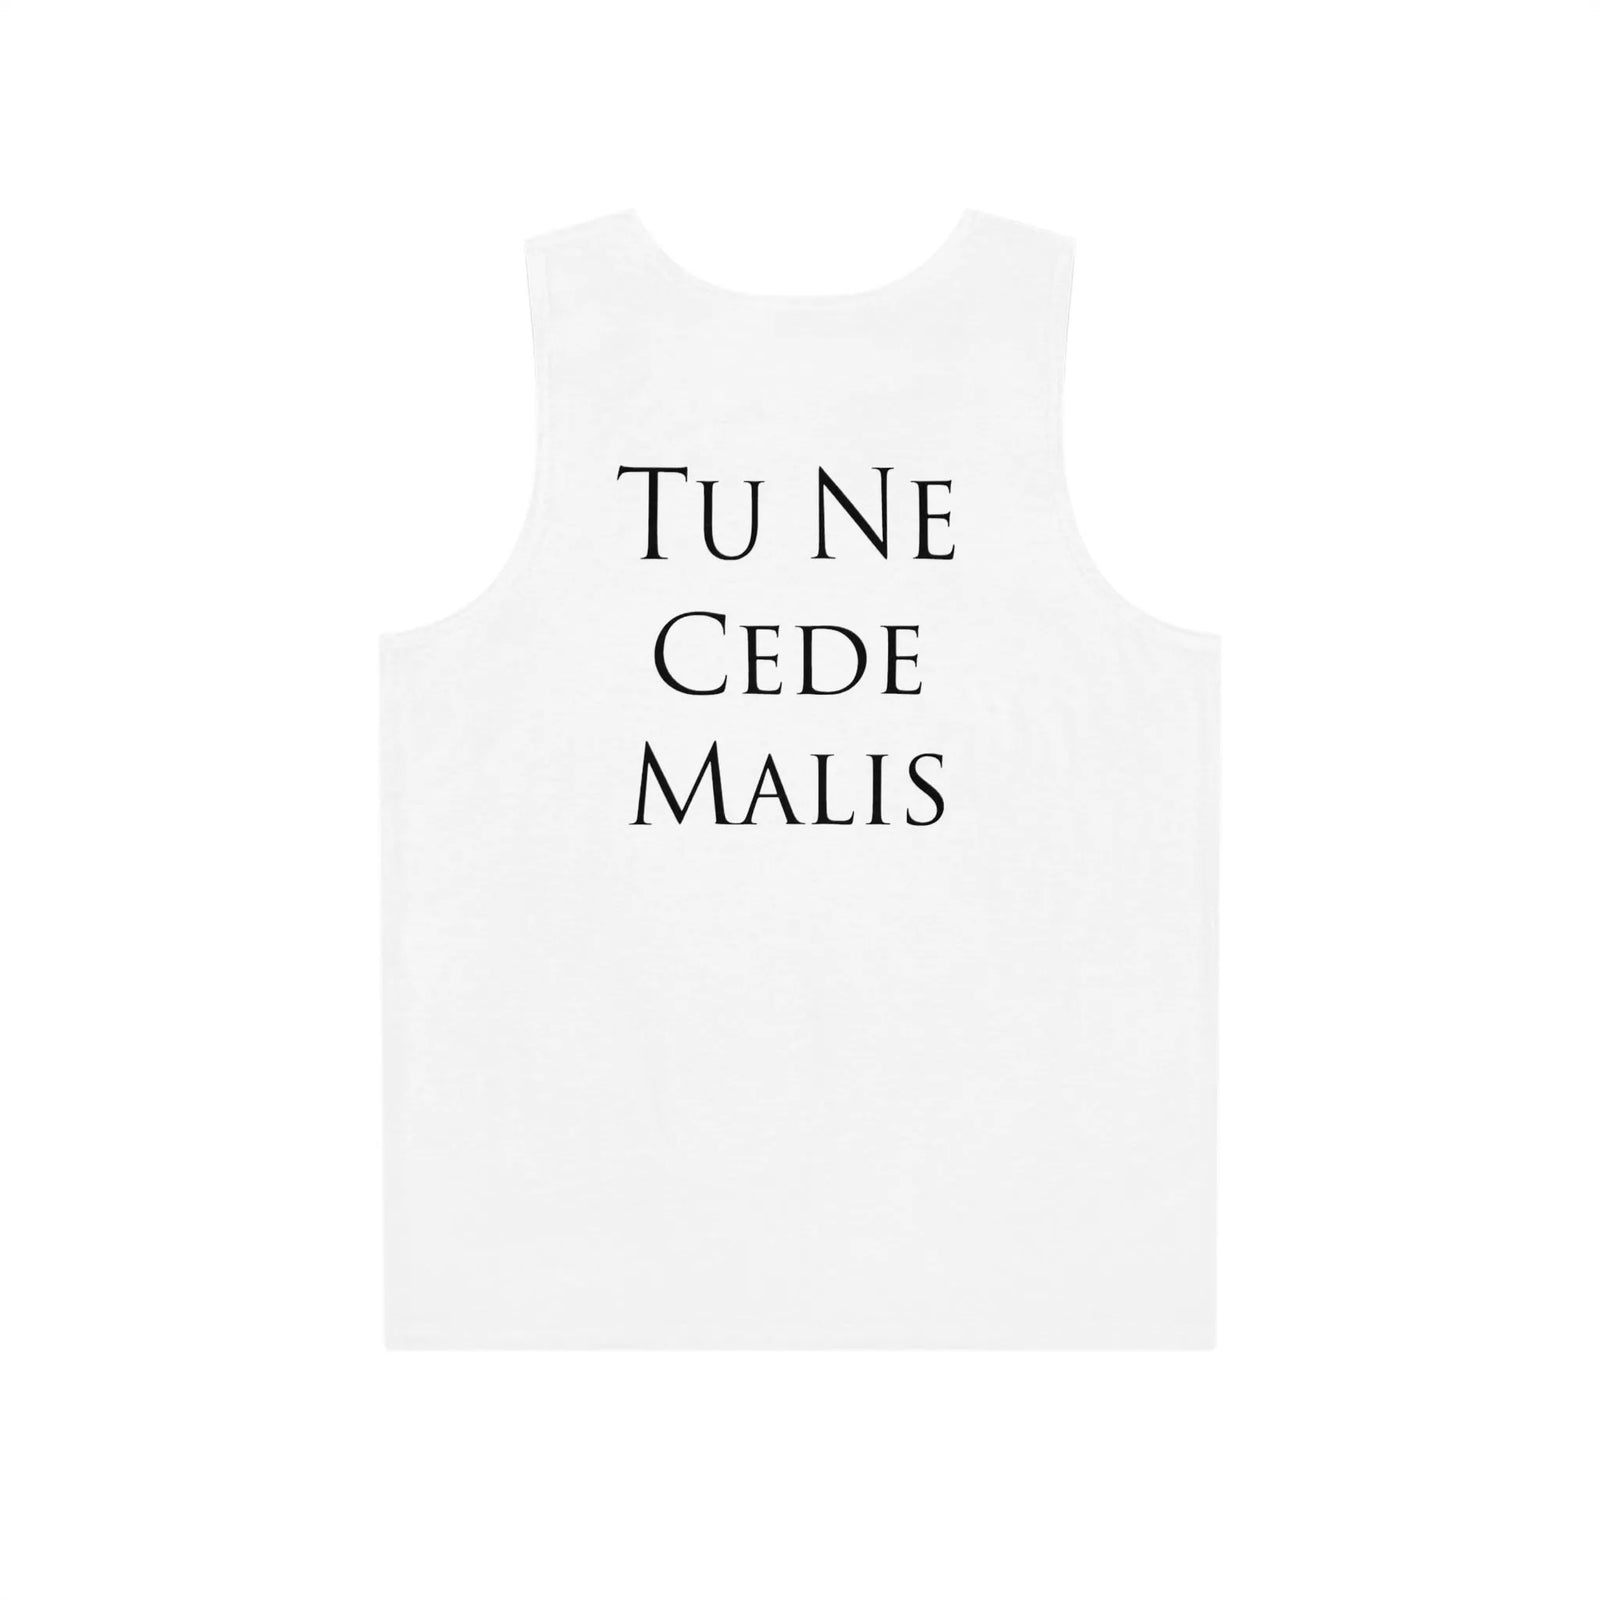 Do Not Give In To Evil Men's Tank